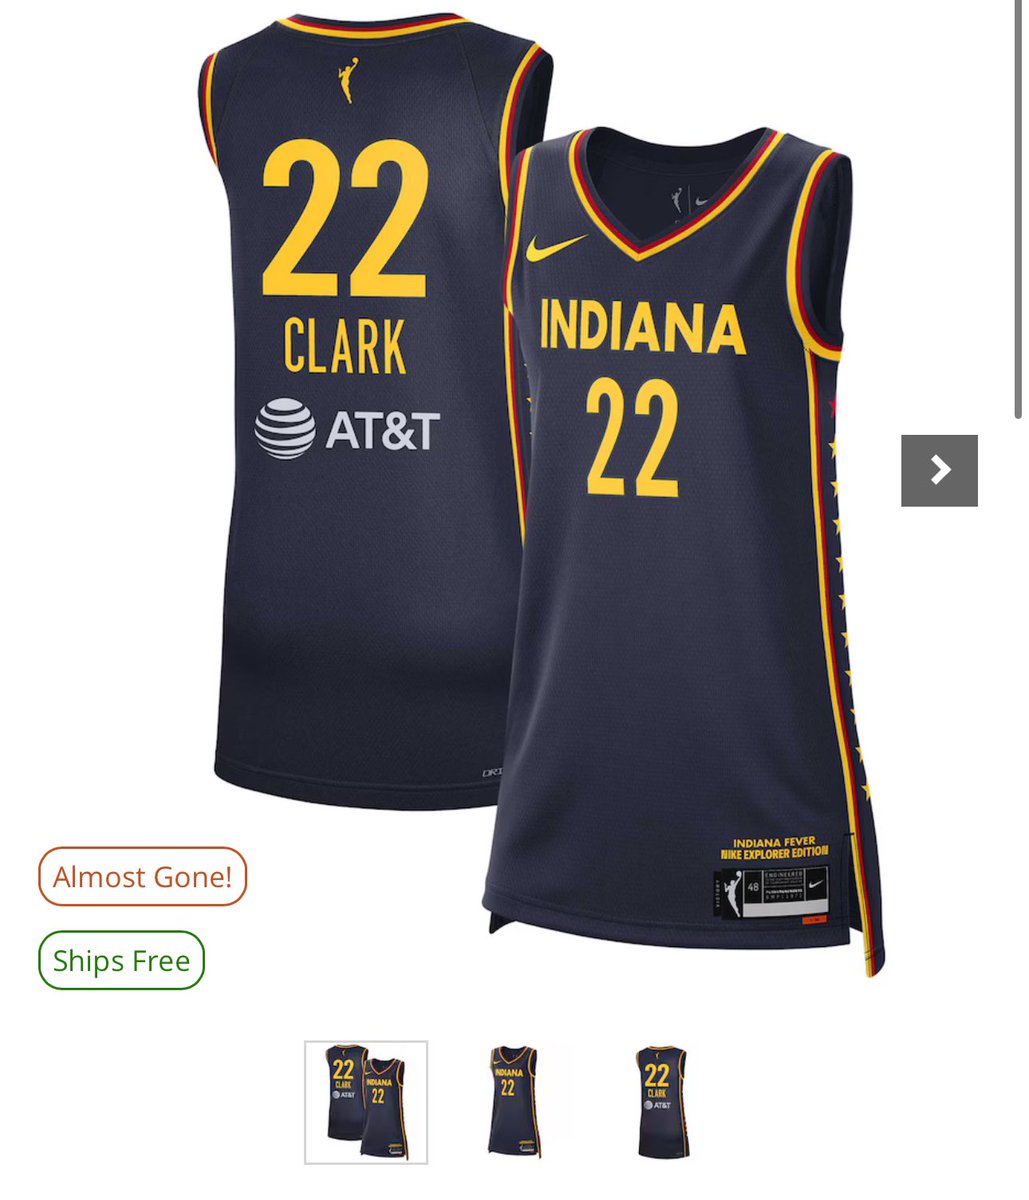 In one hour, Fanatics shows that it has sold out of Caitlin Clark’s Fever jersey in XS, M, L, XL and XXL.